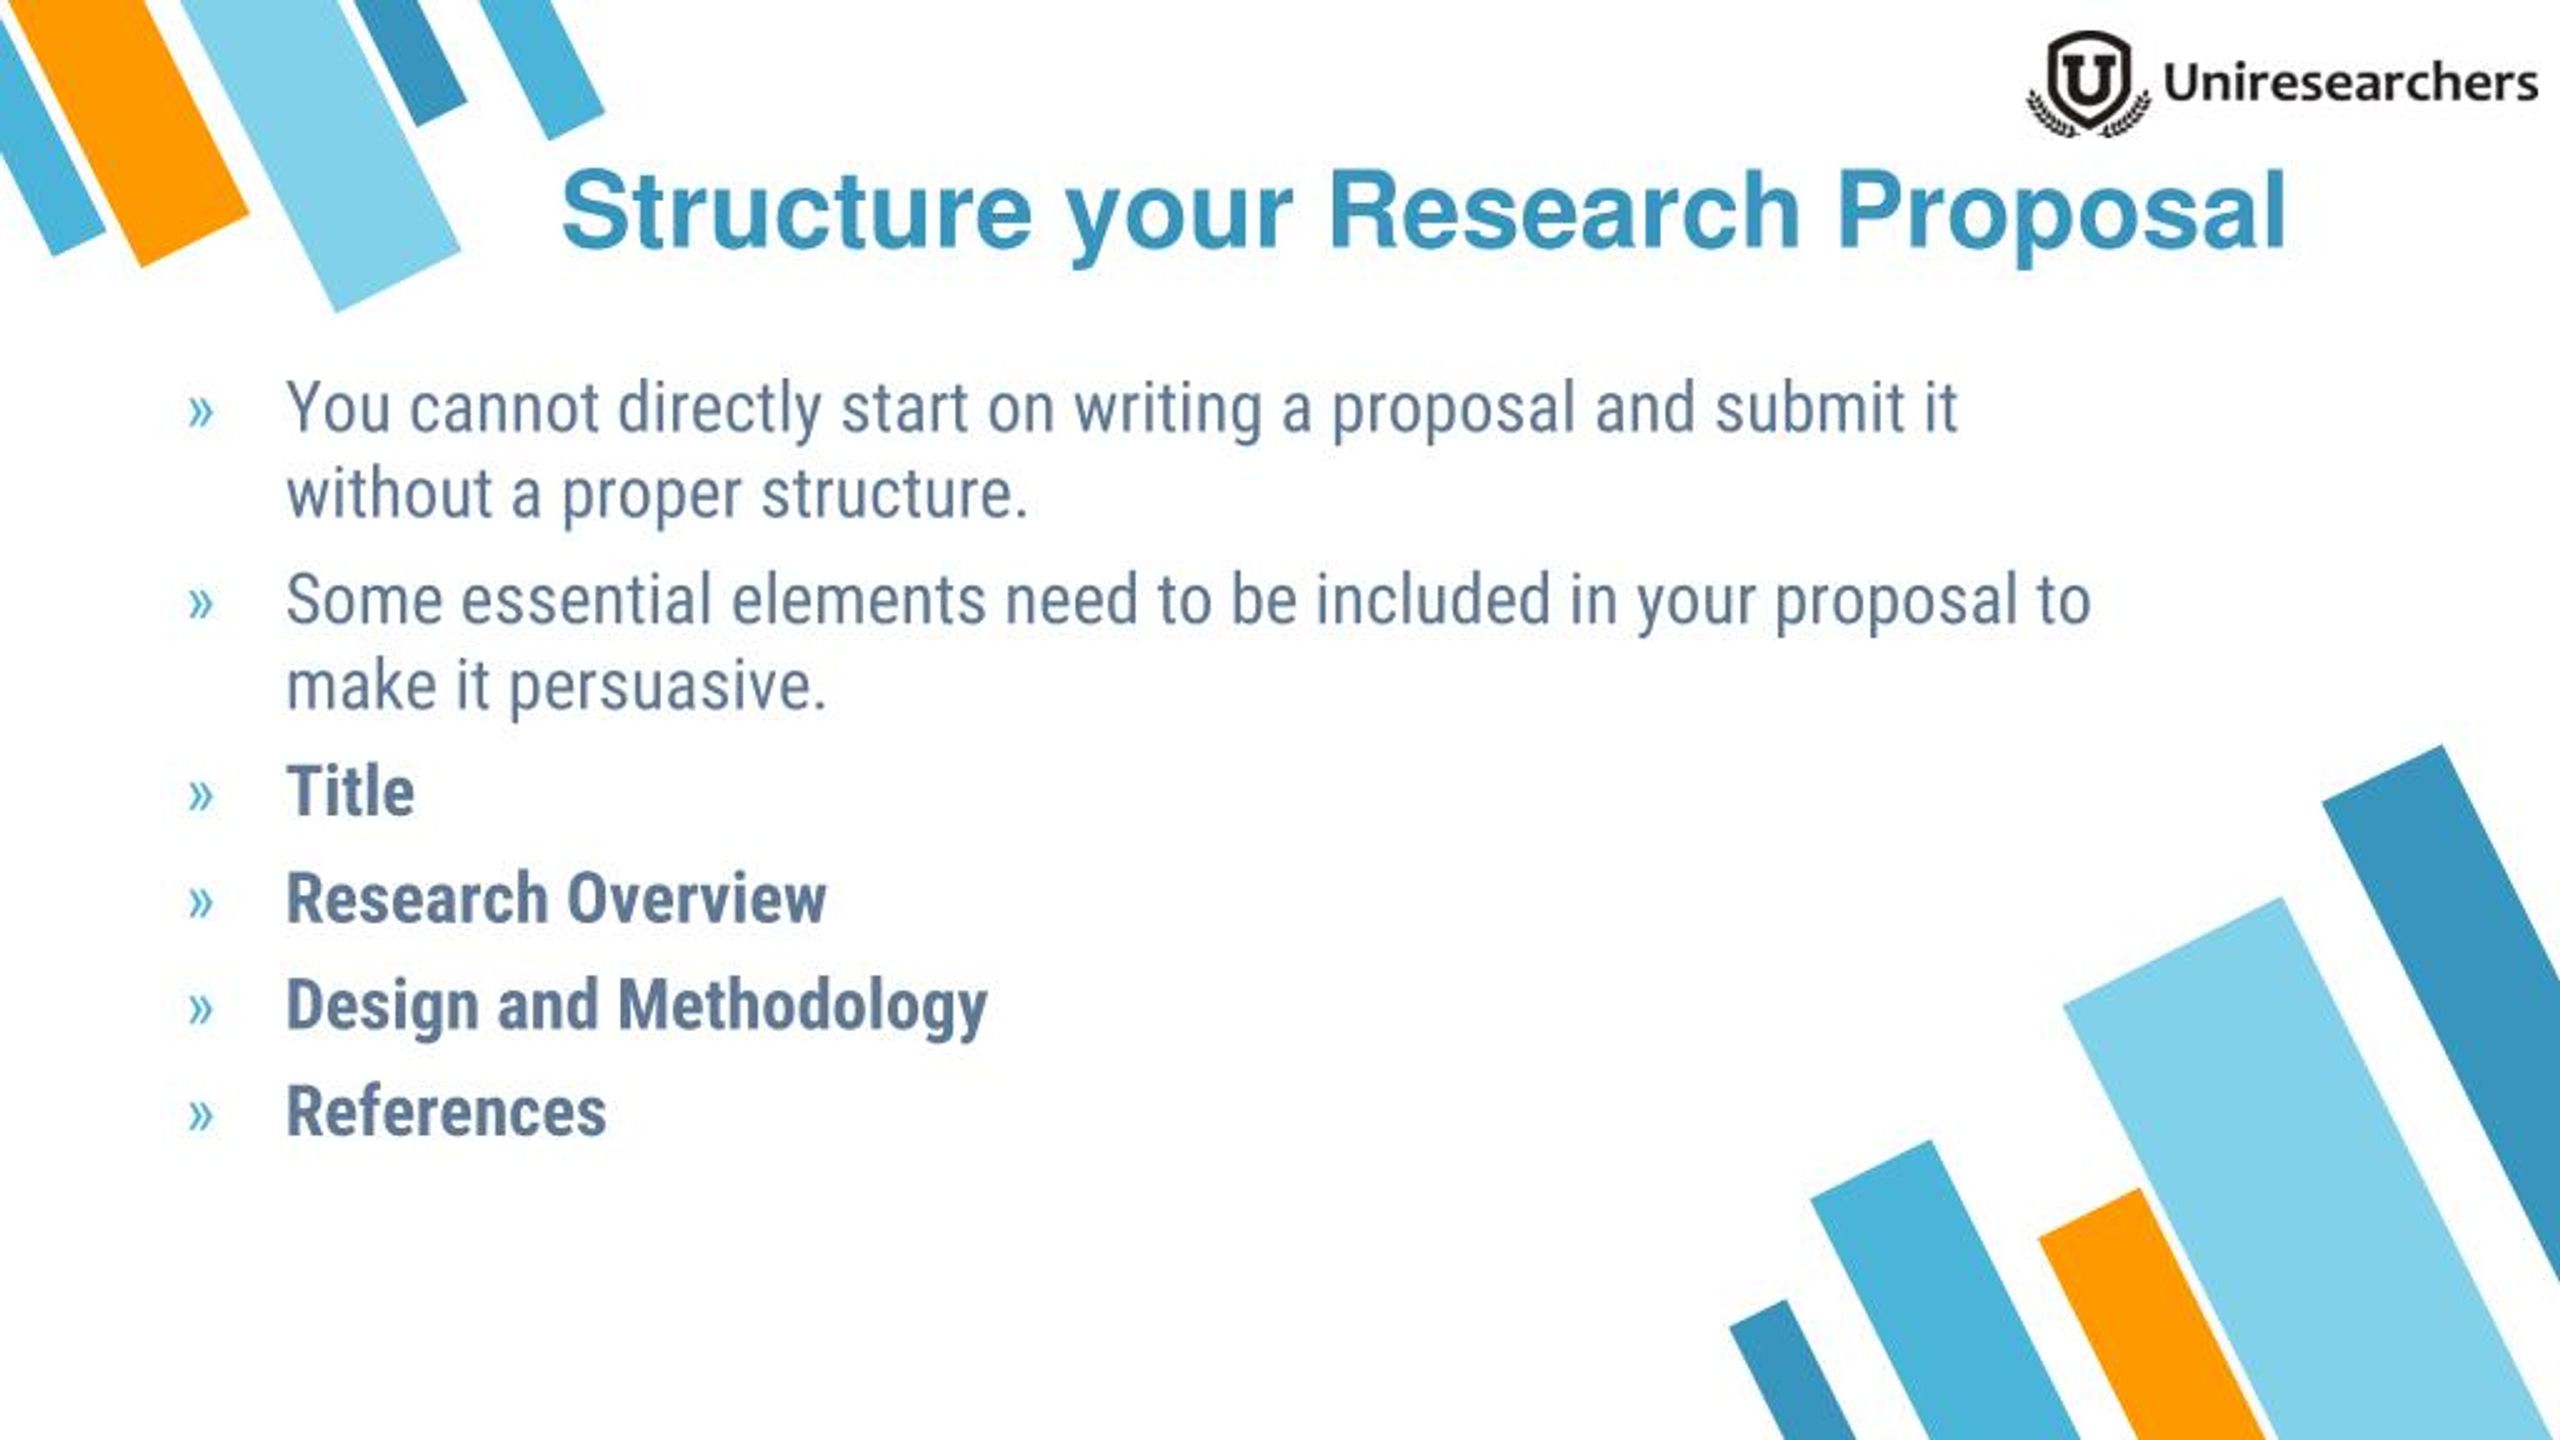 research proposal guide